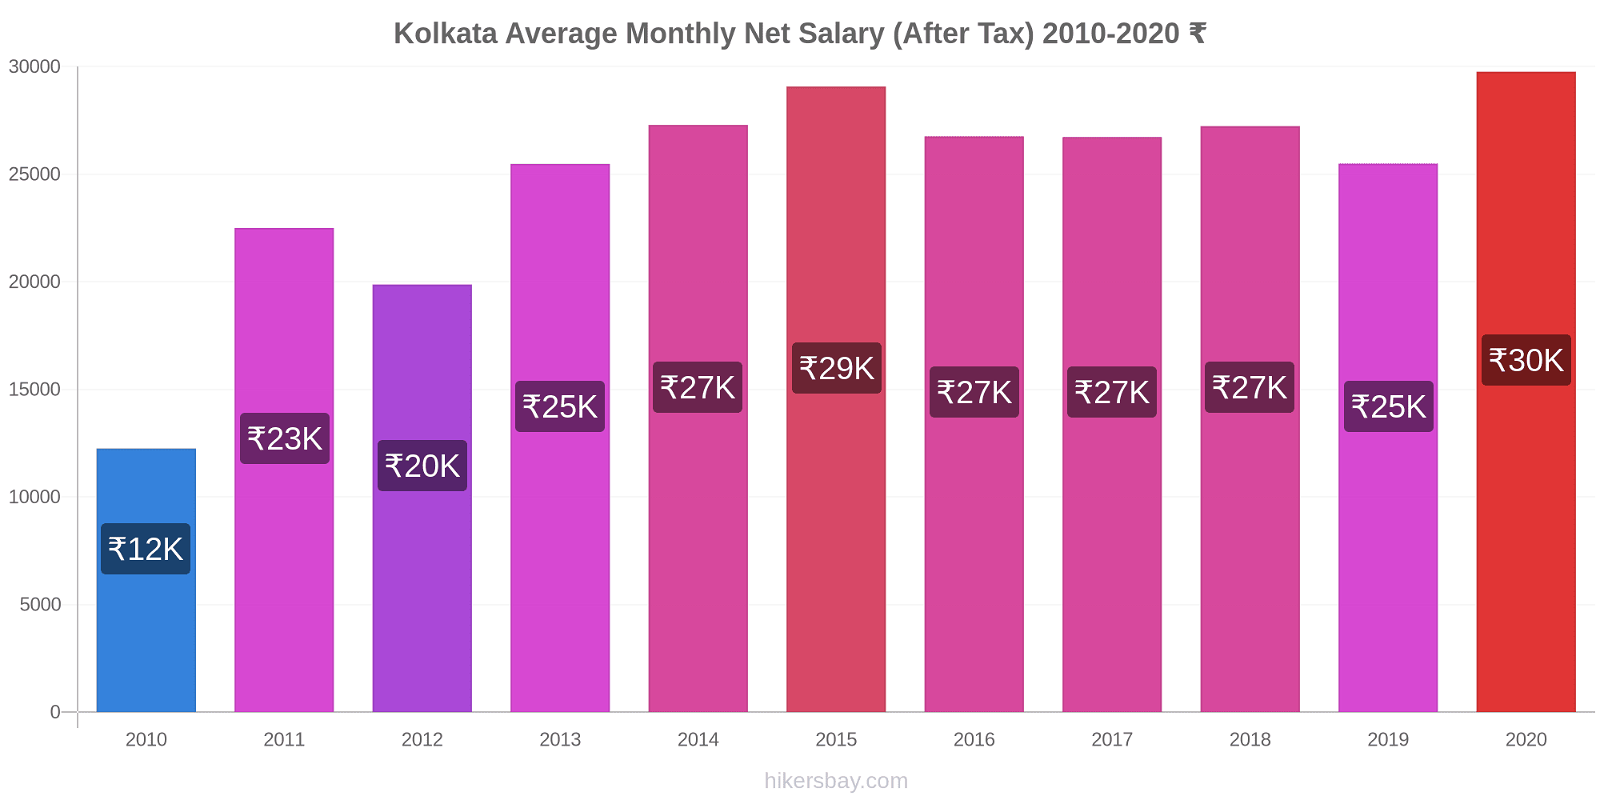 Kolkata price changes Average Monthly Net Salary (After Tax) hikersbay.com